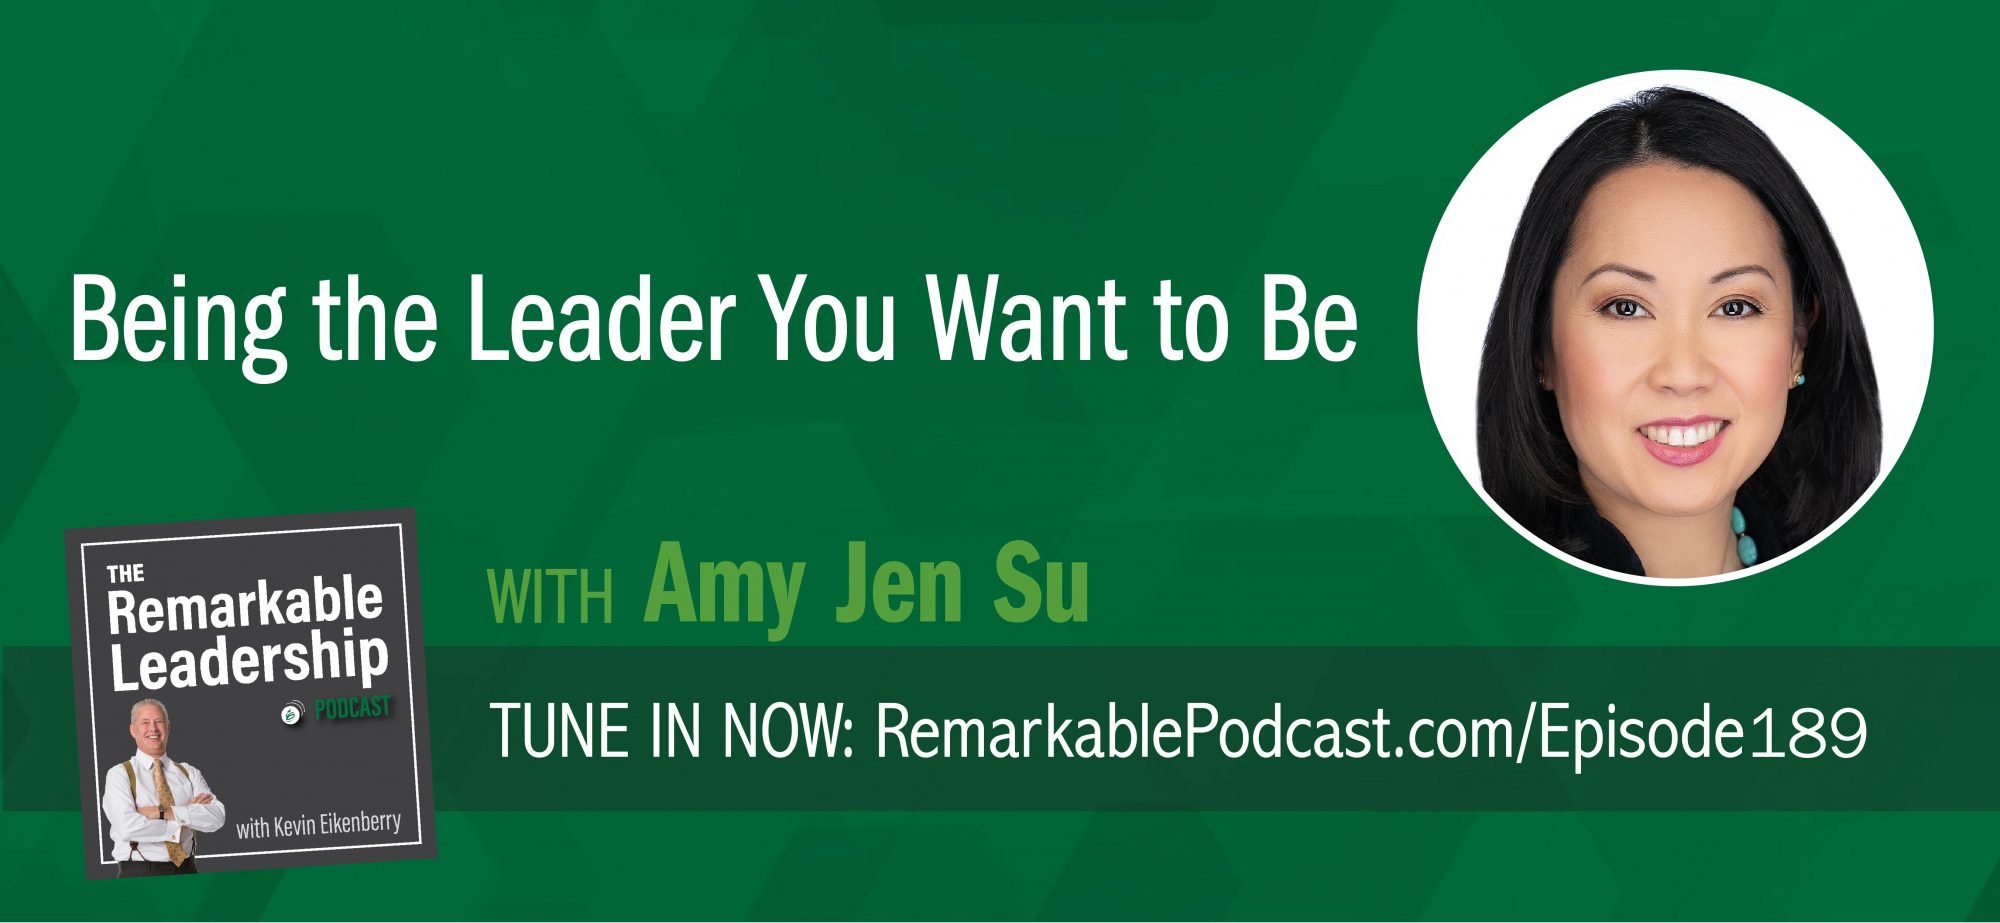 You know those good days. You wake up energized and confident. You cross stuff off your list, have productive meetings, make good decisions. In short, you are your best self. The question becomes how do you bring your best self every day? Amy Jen Su is the author of The Leader You Want to Be: Five Essential Principles for Bringing Out Your Best Self—Every Day. She joins Kevin to discuss both the principles that bring out our best and the pitfalls that trap us. If we get caught up in “doing” and let the demands of life take over before we can connect to ourselves, we not only impact our best self but our team and our culture.